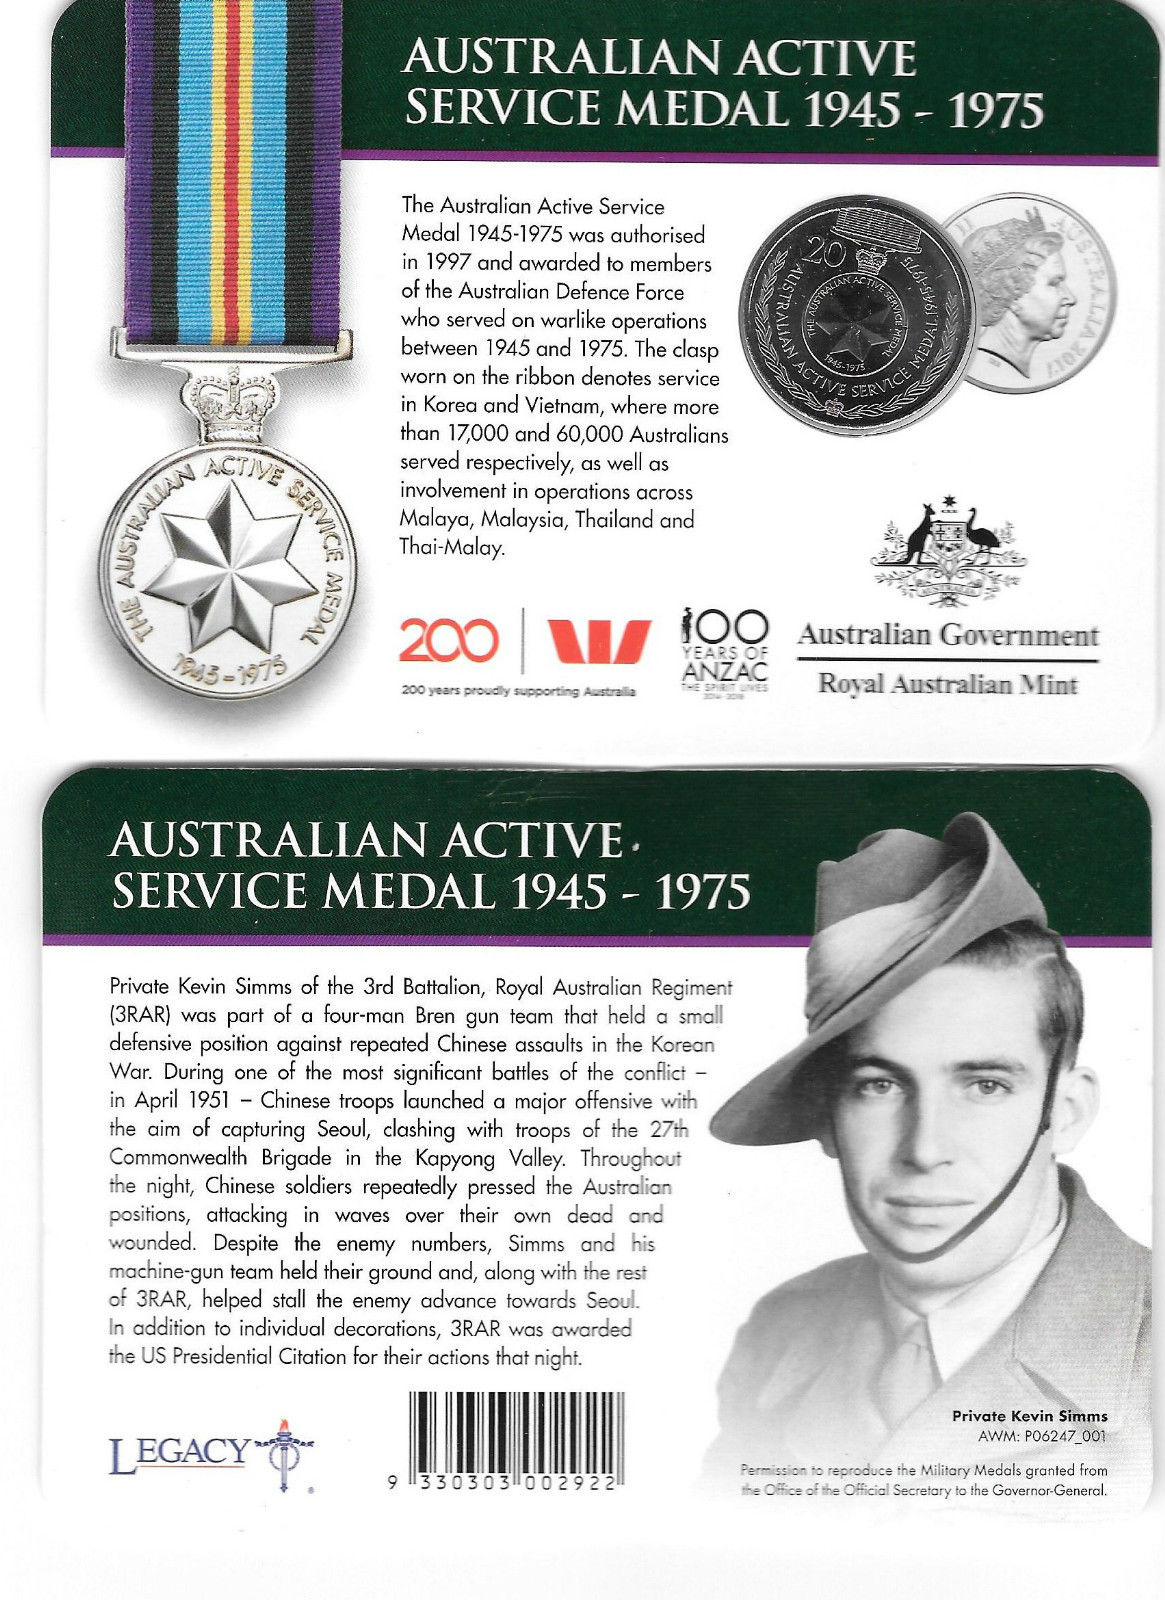 Thumbnail for 2017 Legends of the ANZACS - Australian Active Service Medal 1945-1975